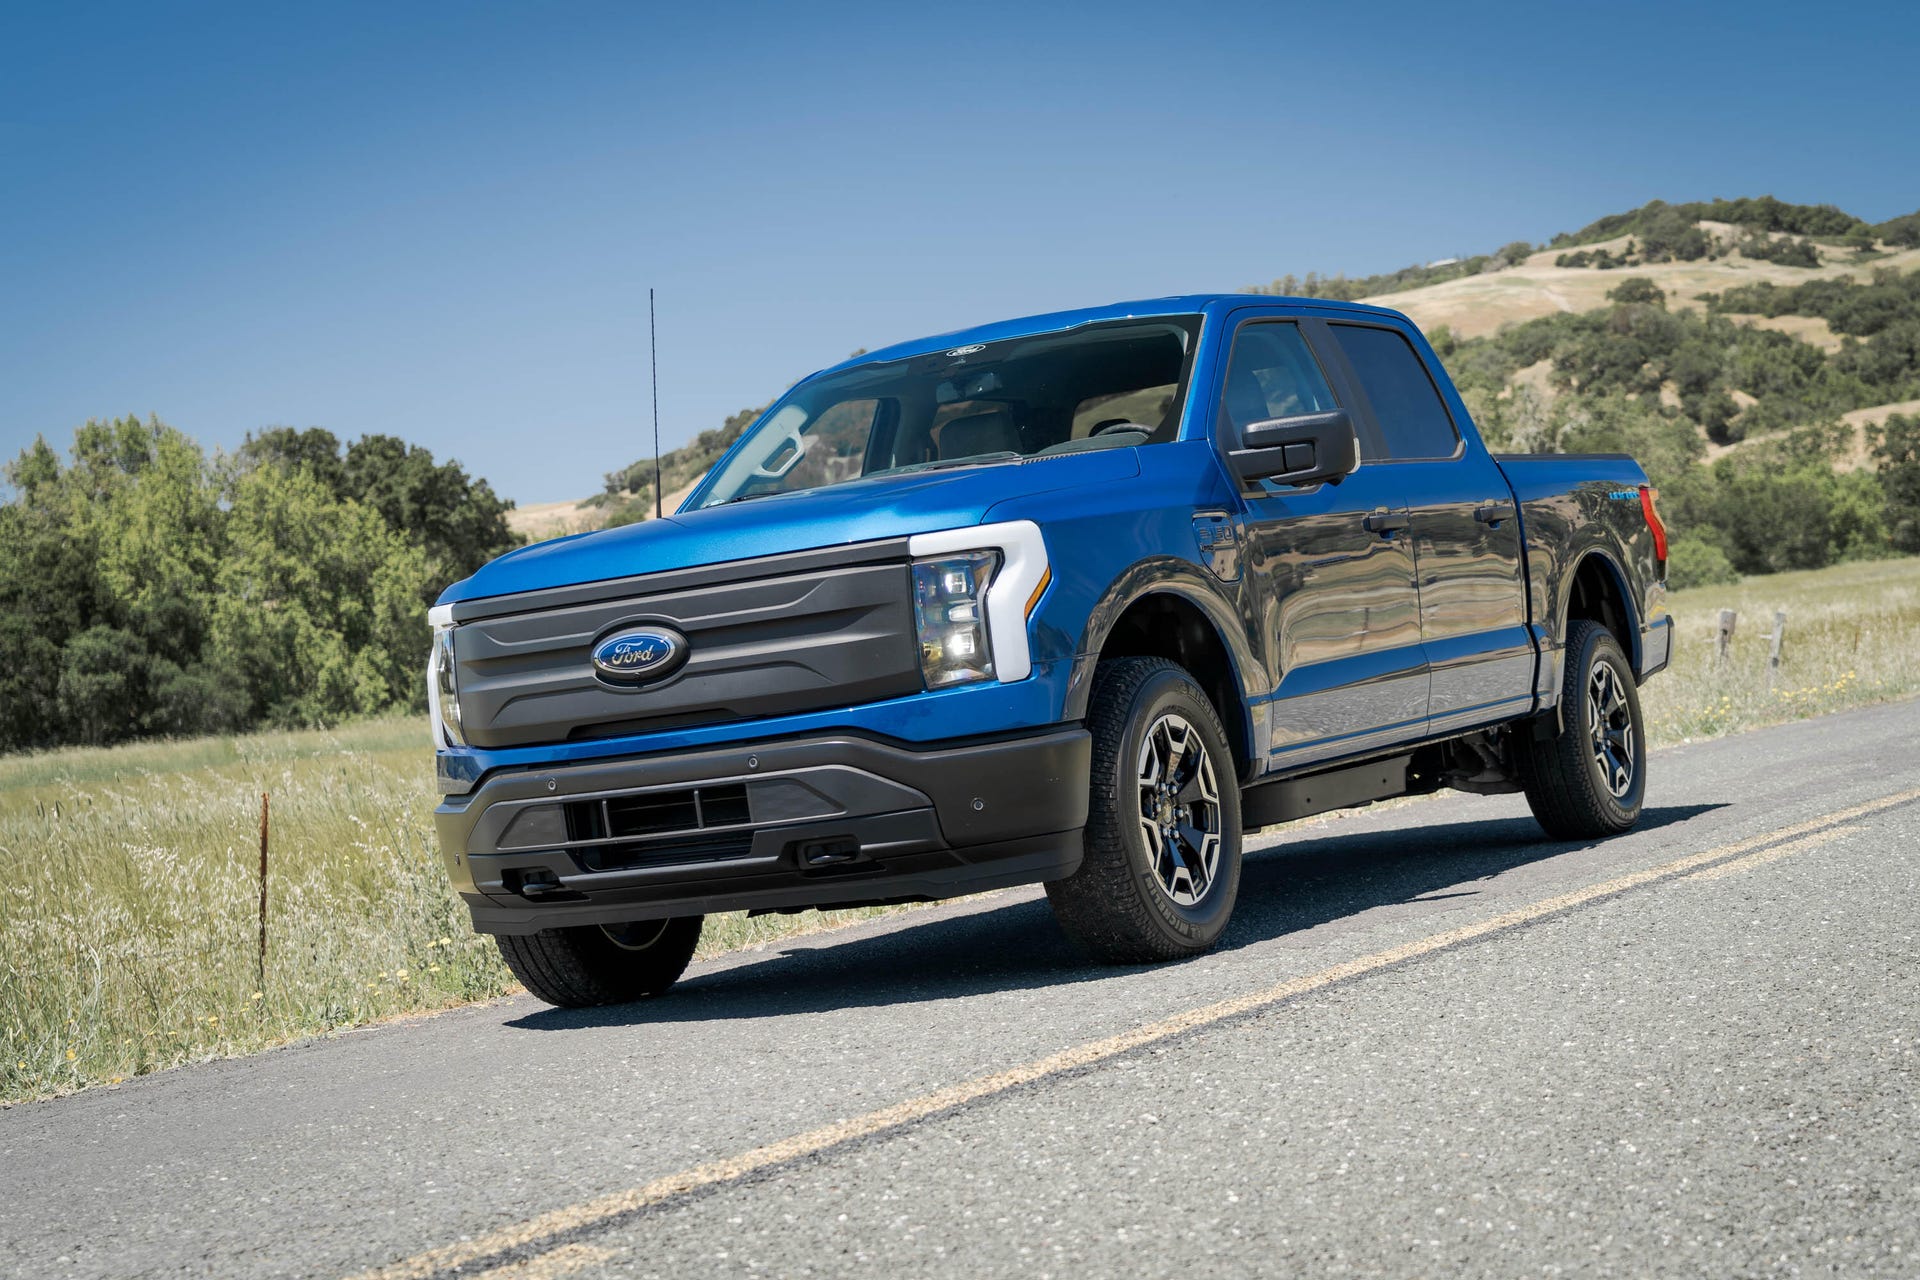 A blue Ford F-150 Lightning Pro pickup on the road